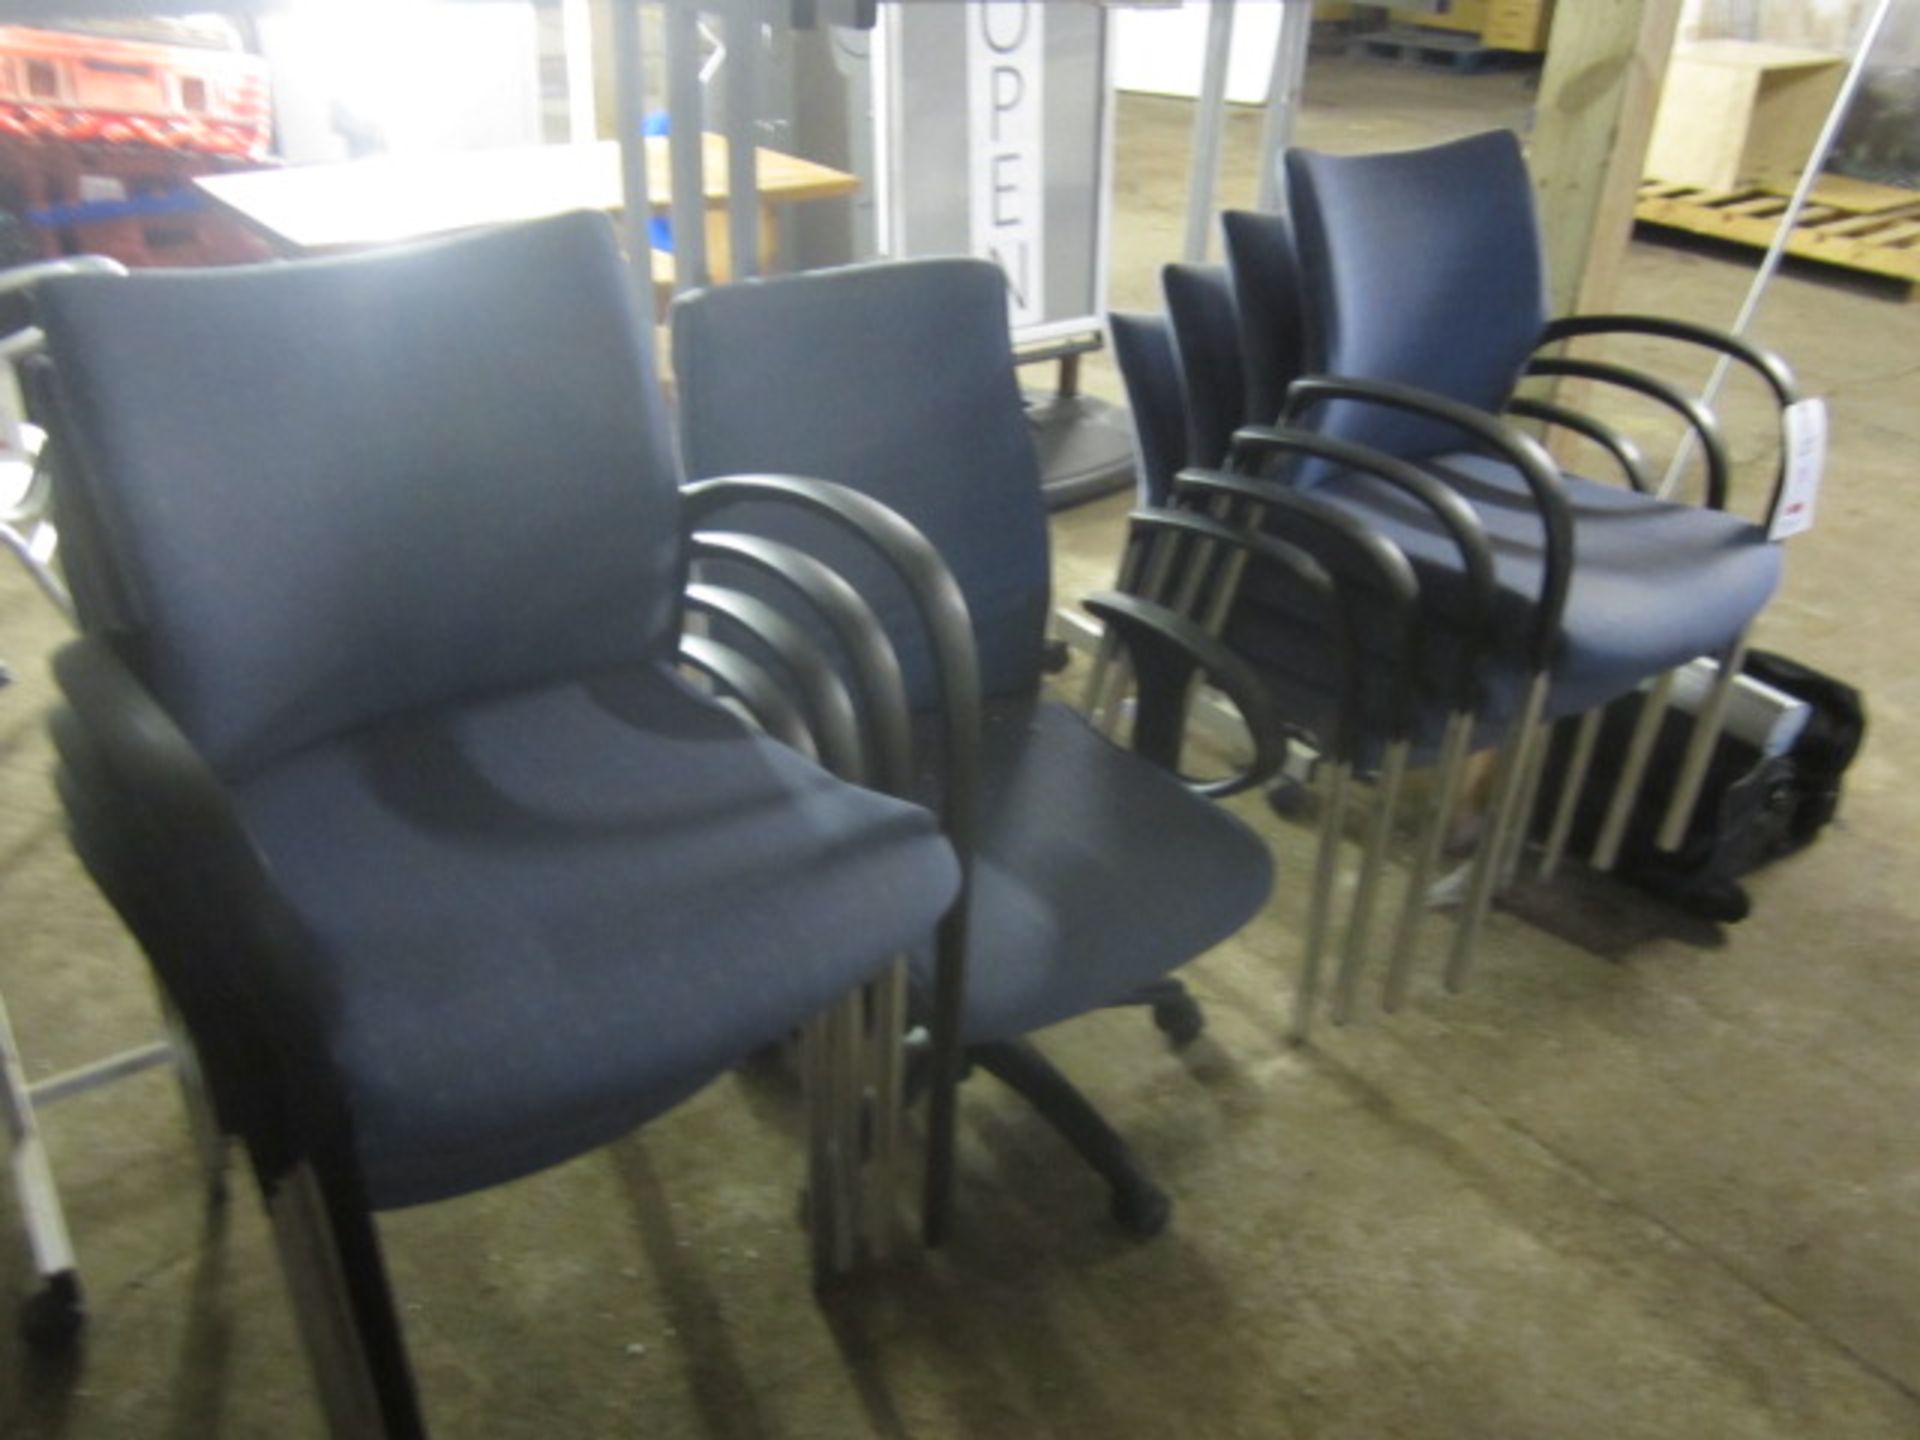 8 x upholstered meeting chairs with 1 x swivel arm chair - Image 2 of 2